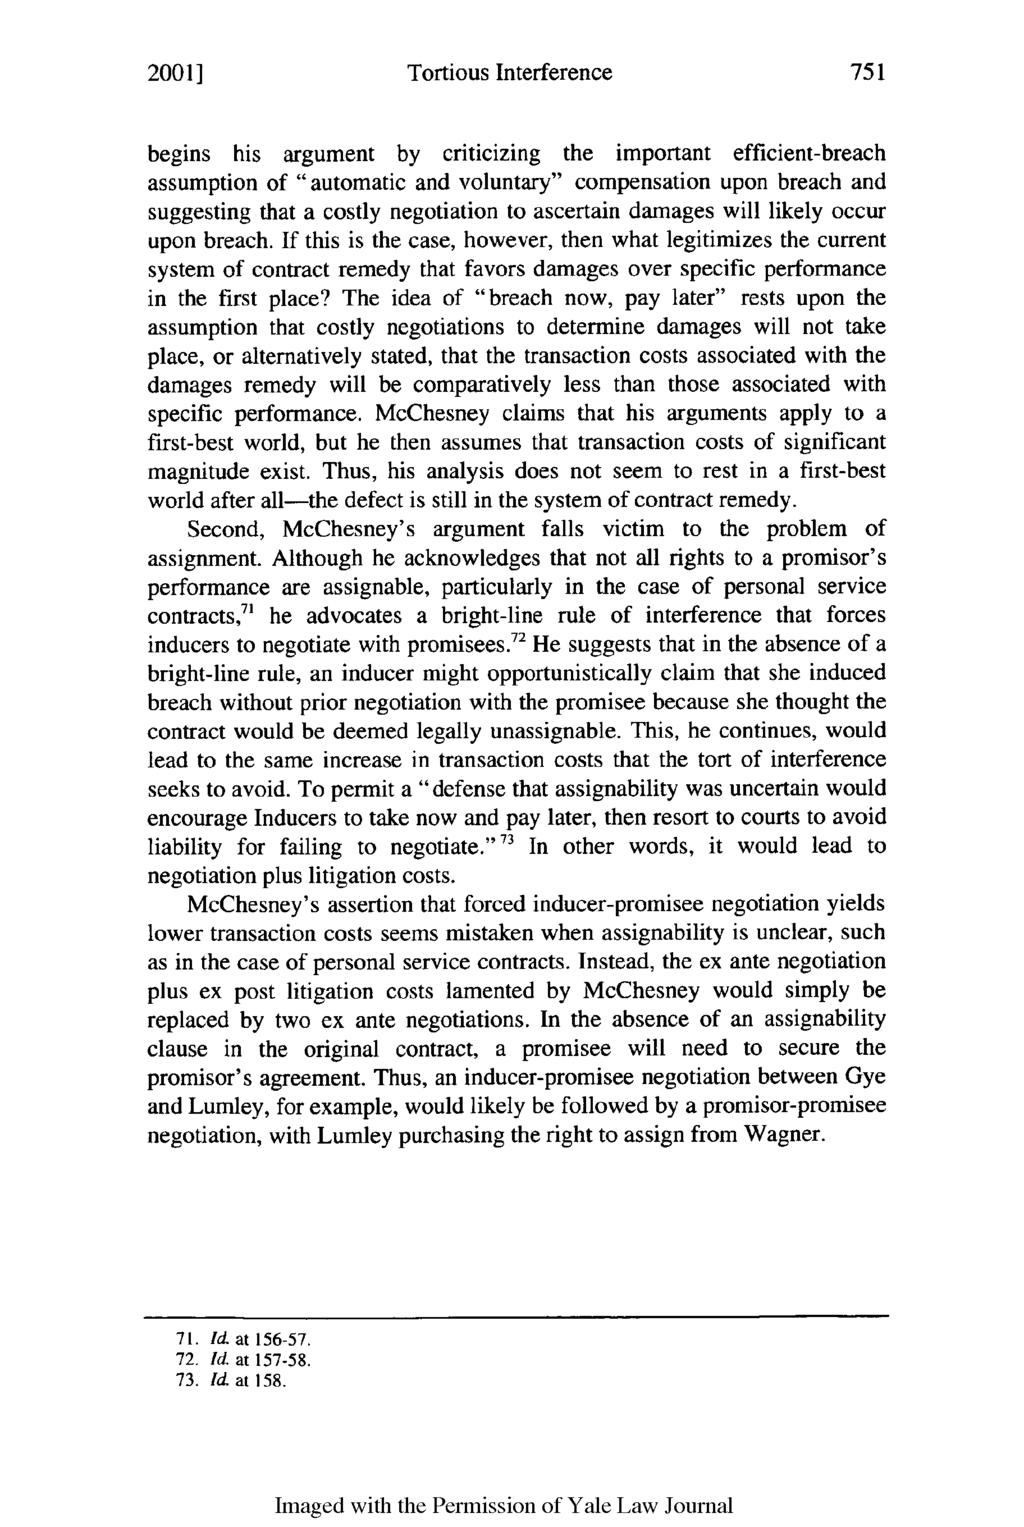 2001] Tortious Interference begins his argument by criticizing the important efficient-breach assumption of "automatic and voluntary" compensation upon breach and suggesting that a costly negotiation